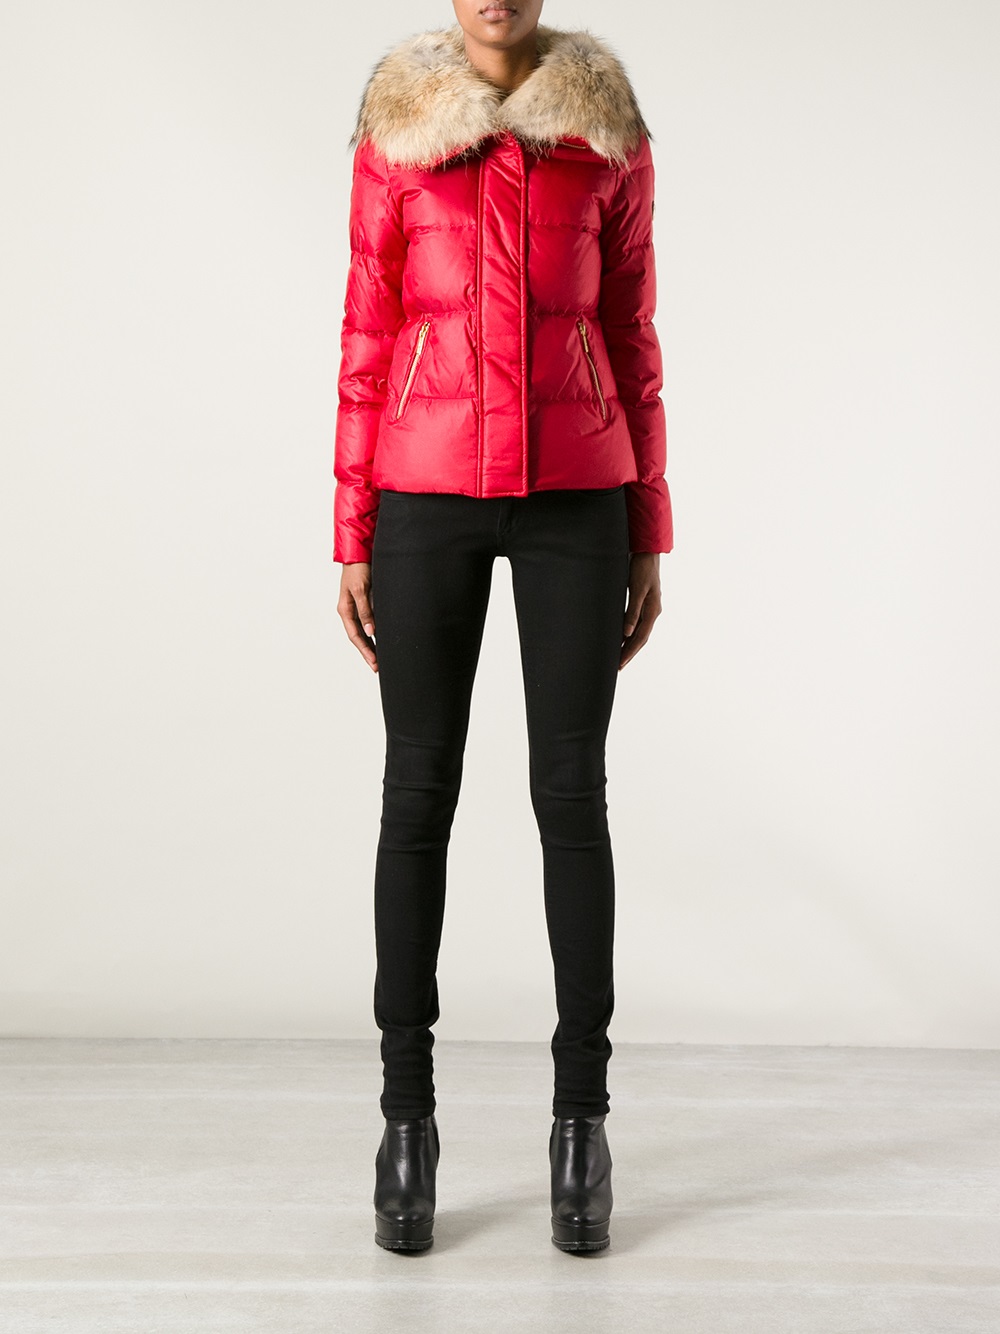 MICHAEL Michael Kors Fur Collar Padded Jacket in Red - Lyst